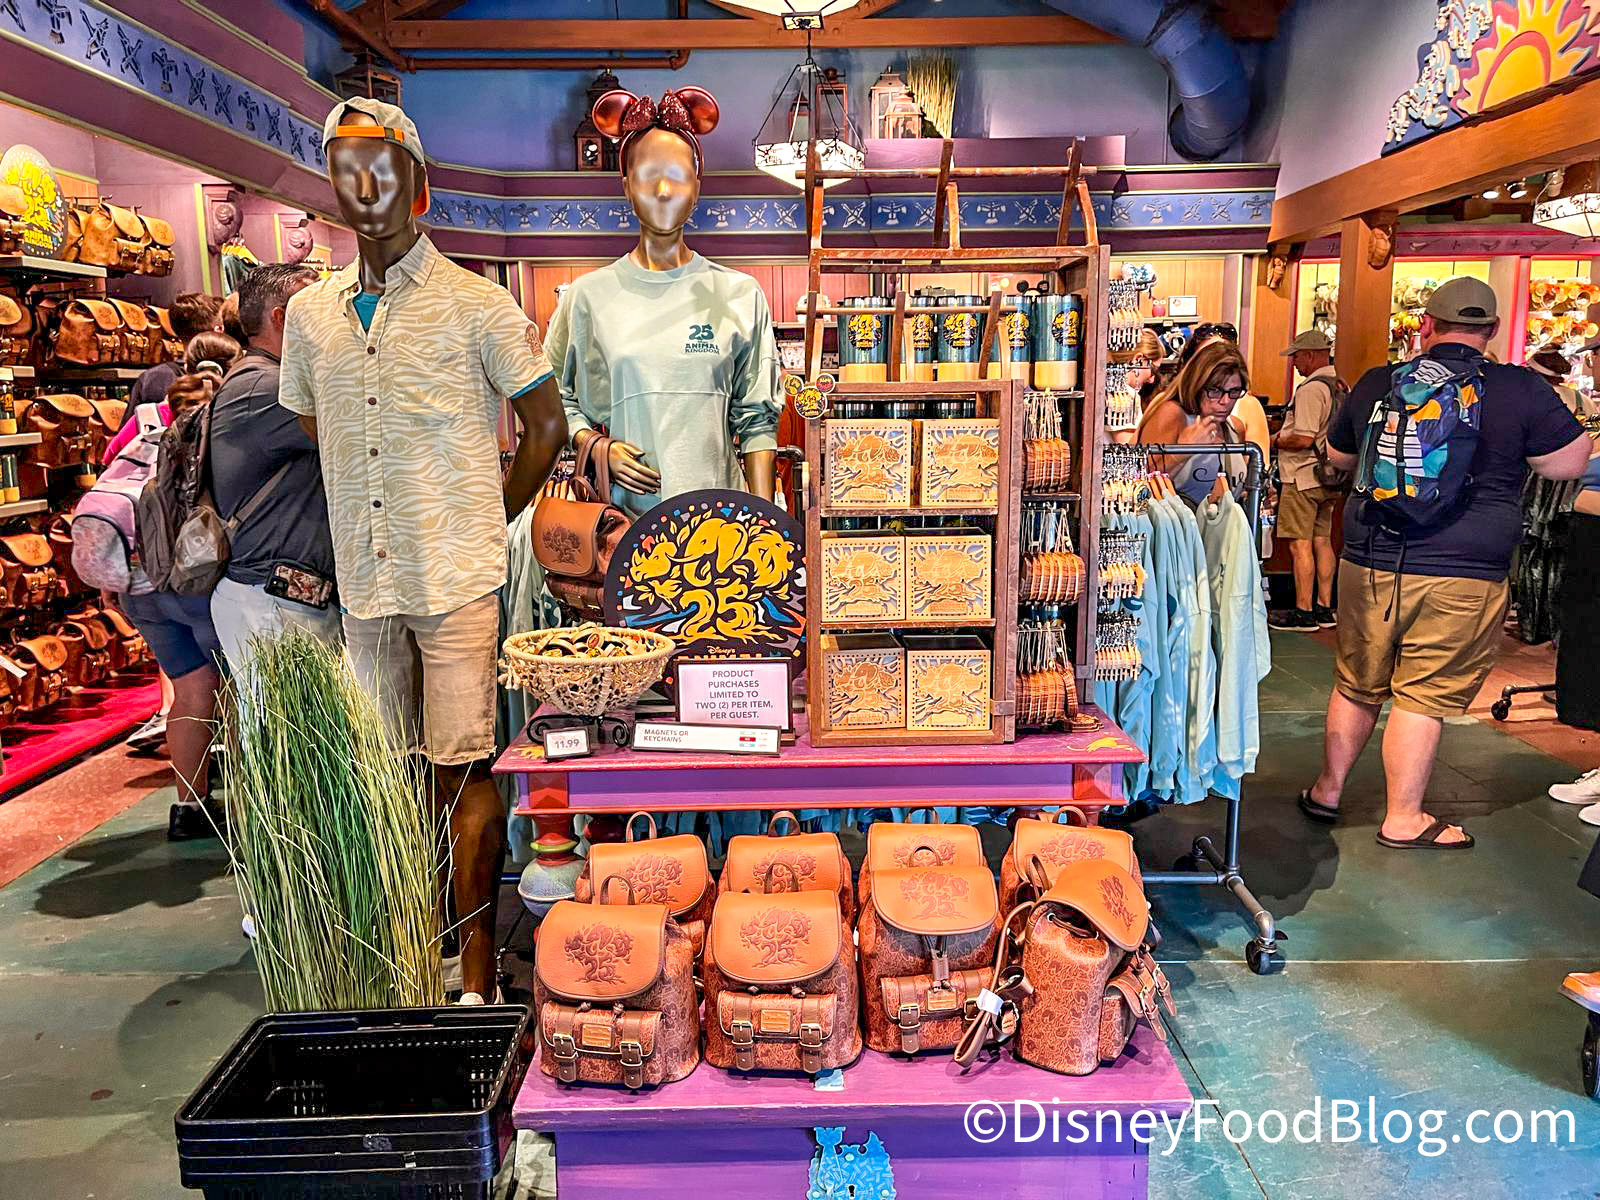 Disney Souvenirs [25 Awesome Gifts for your Next Disney Vacay!] 